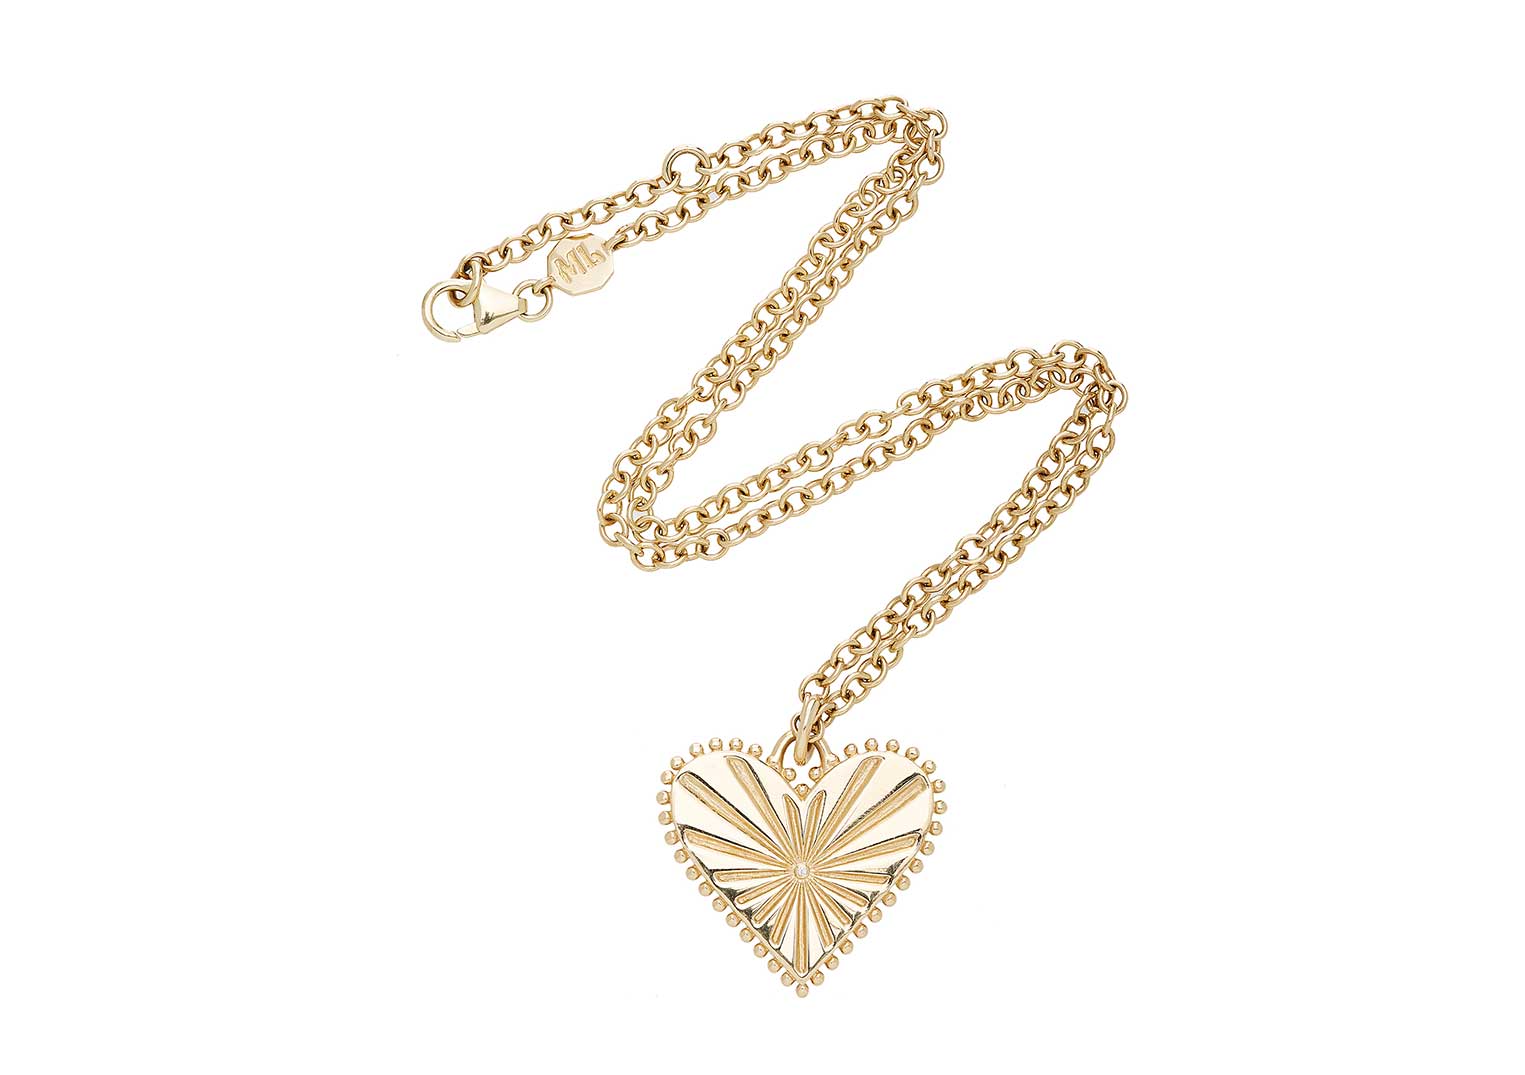 Marlo Laz 14K Pour Toujours Heart Coin Necklace with Diamonds | Latest ...